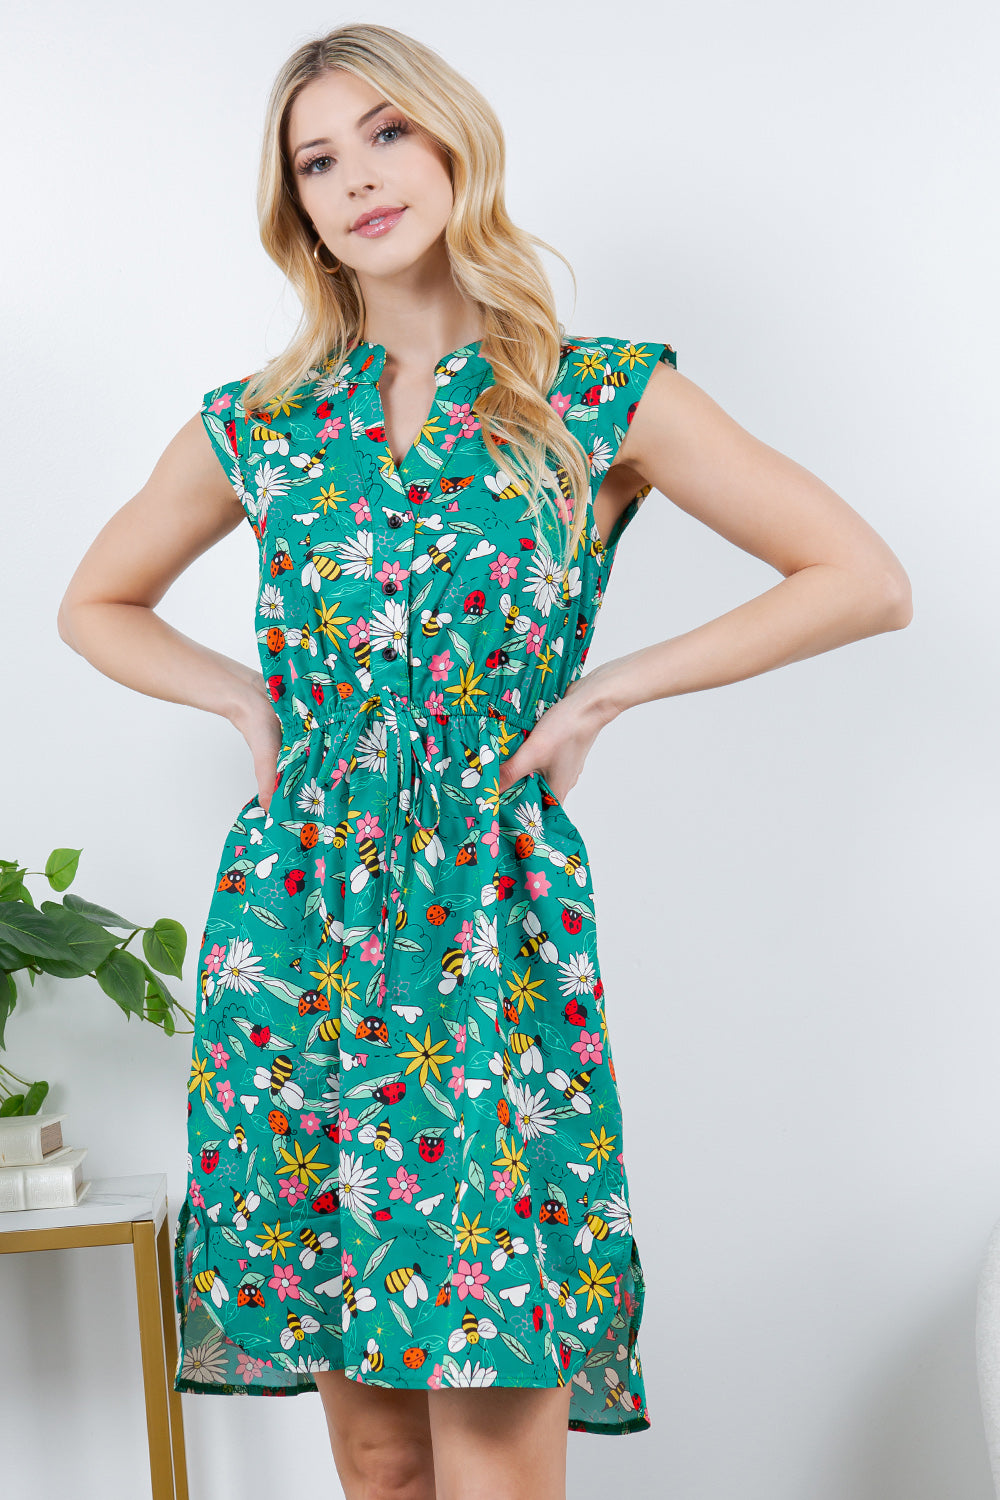 Floral with Colorful Insect dress